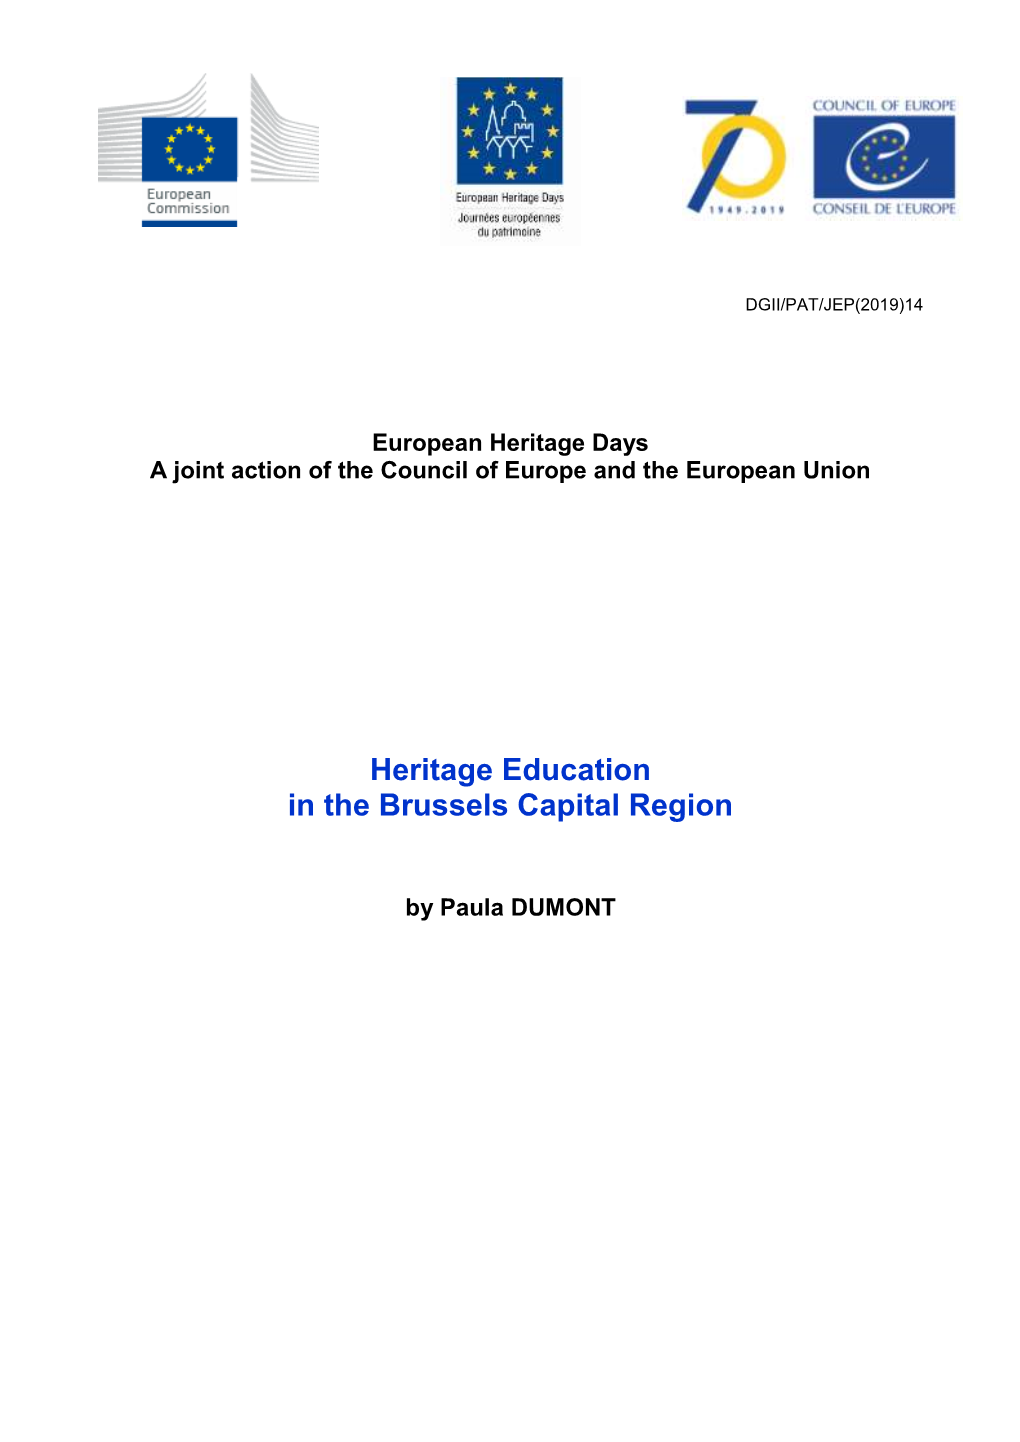 Heritage Education in the Brussels Capital Region